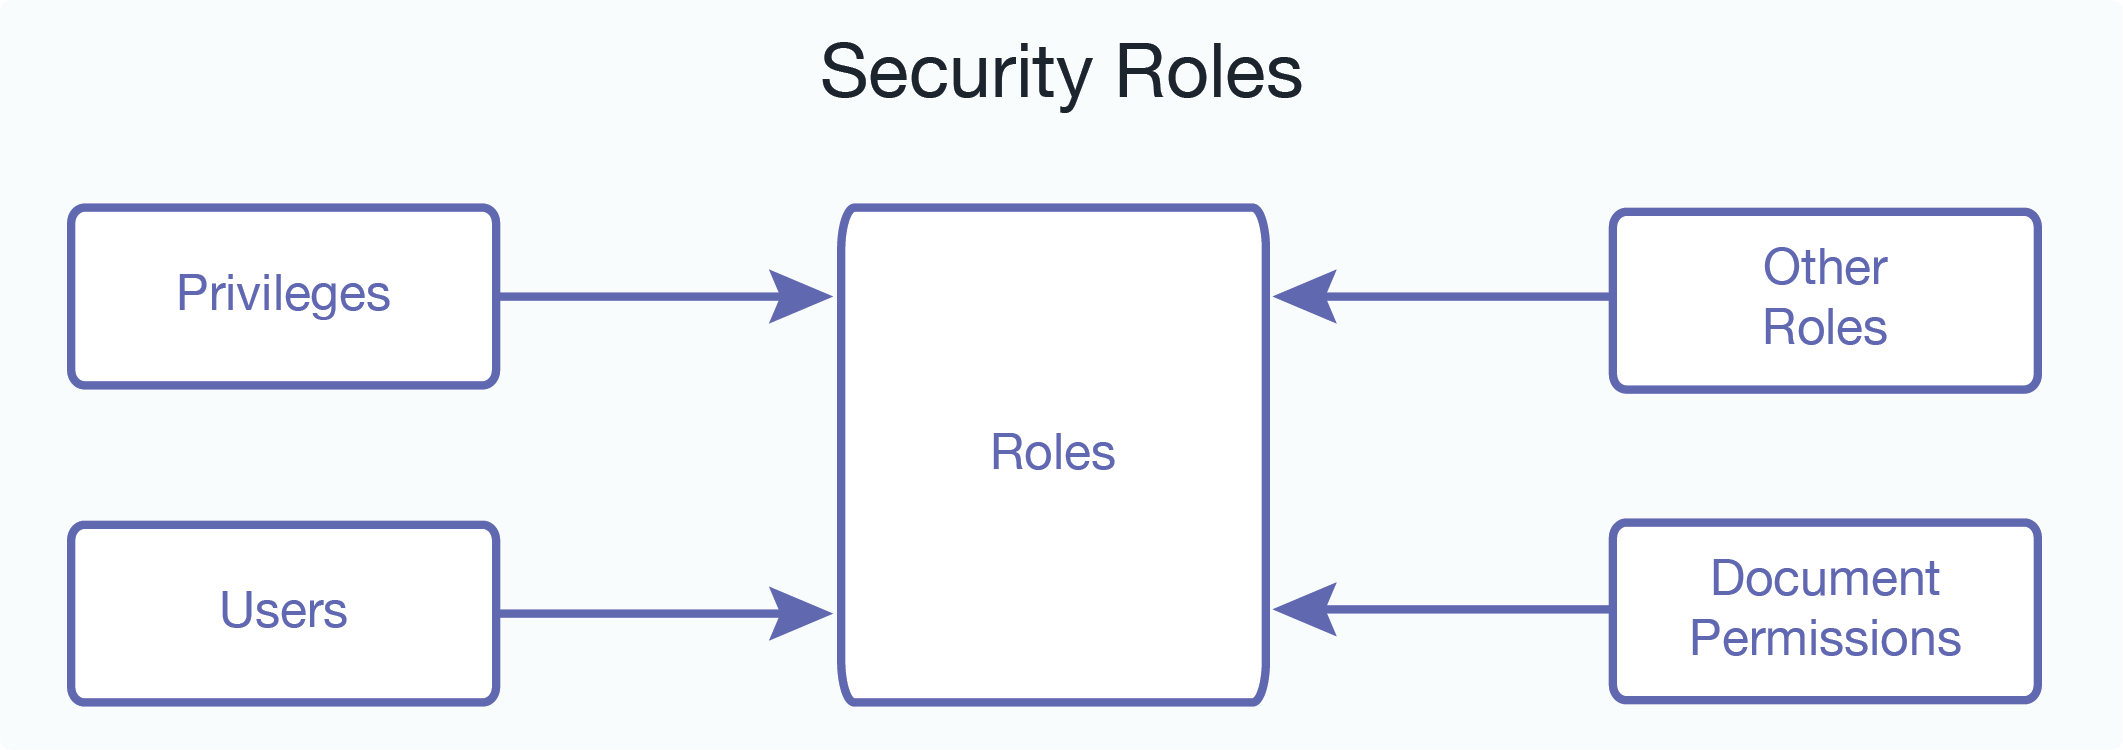 Diagram showing privileges, users, other roles, and permissions pointing to one or more roles